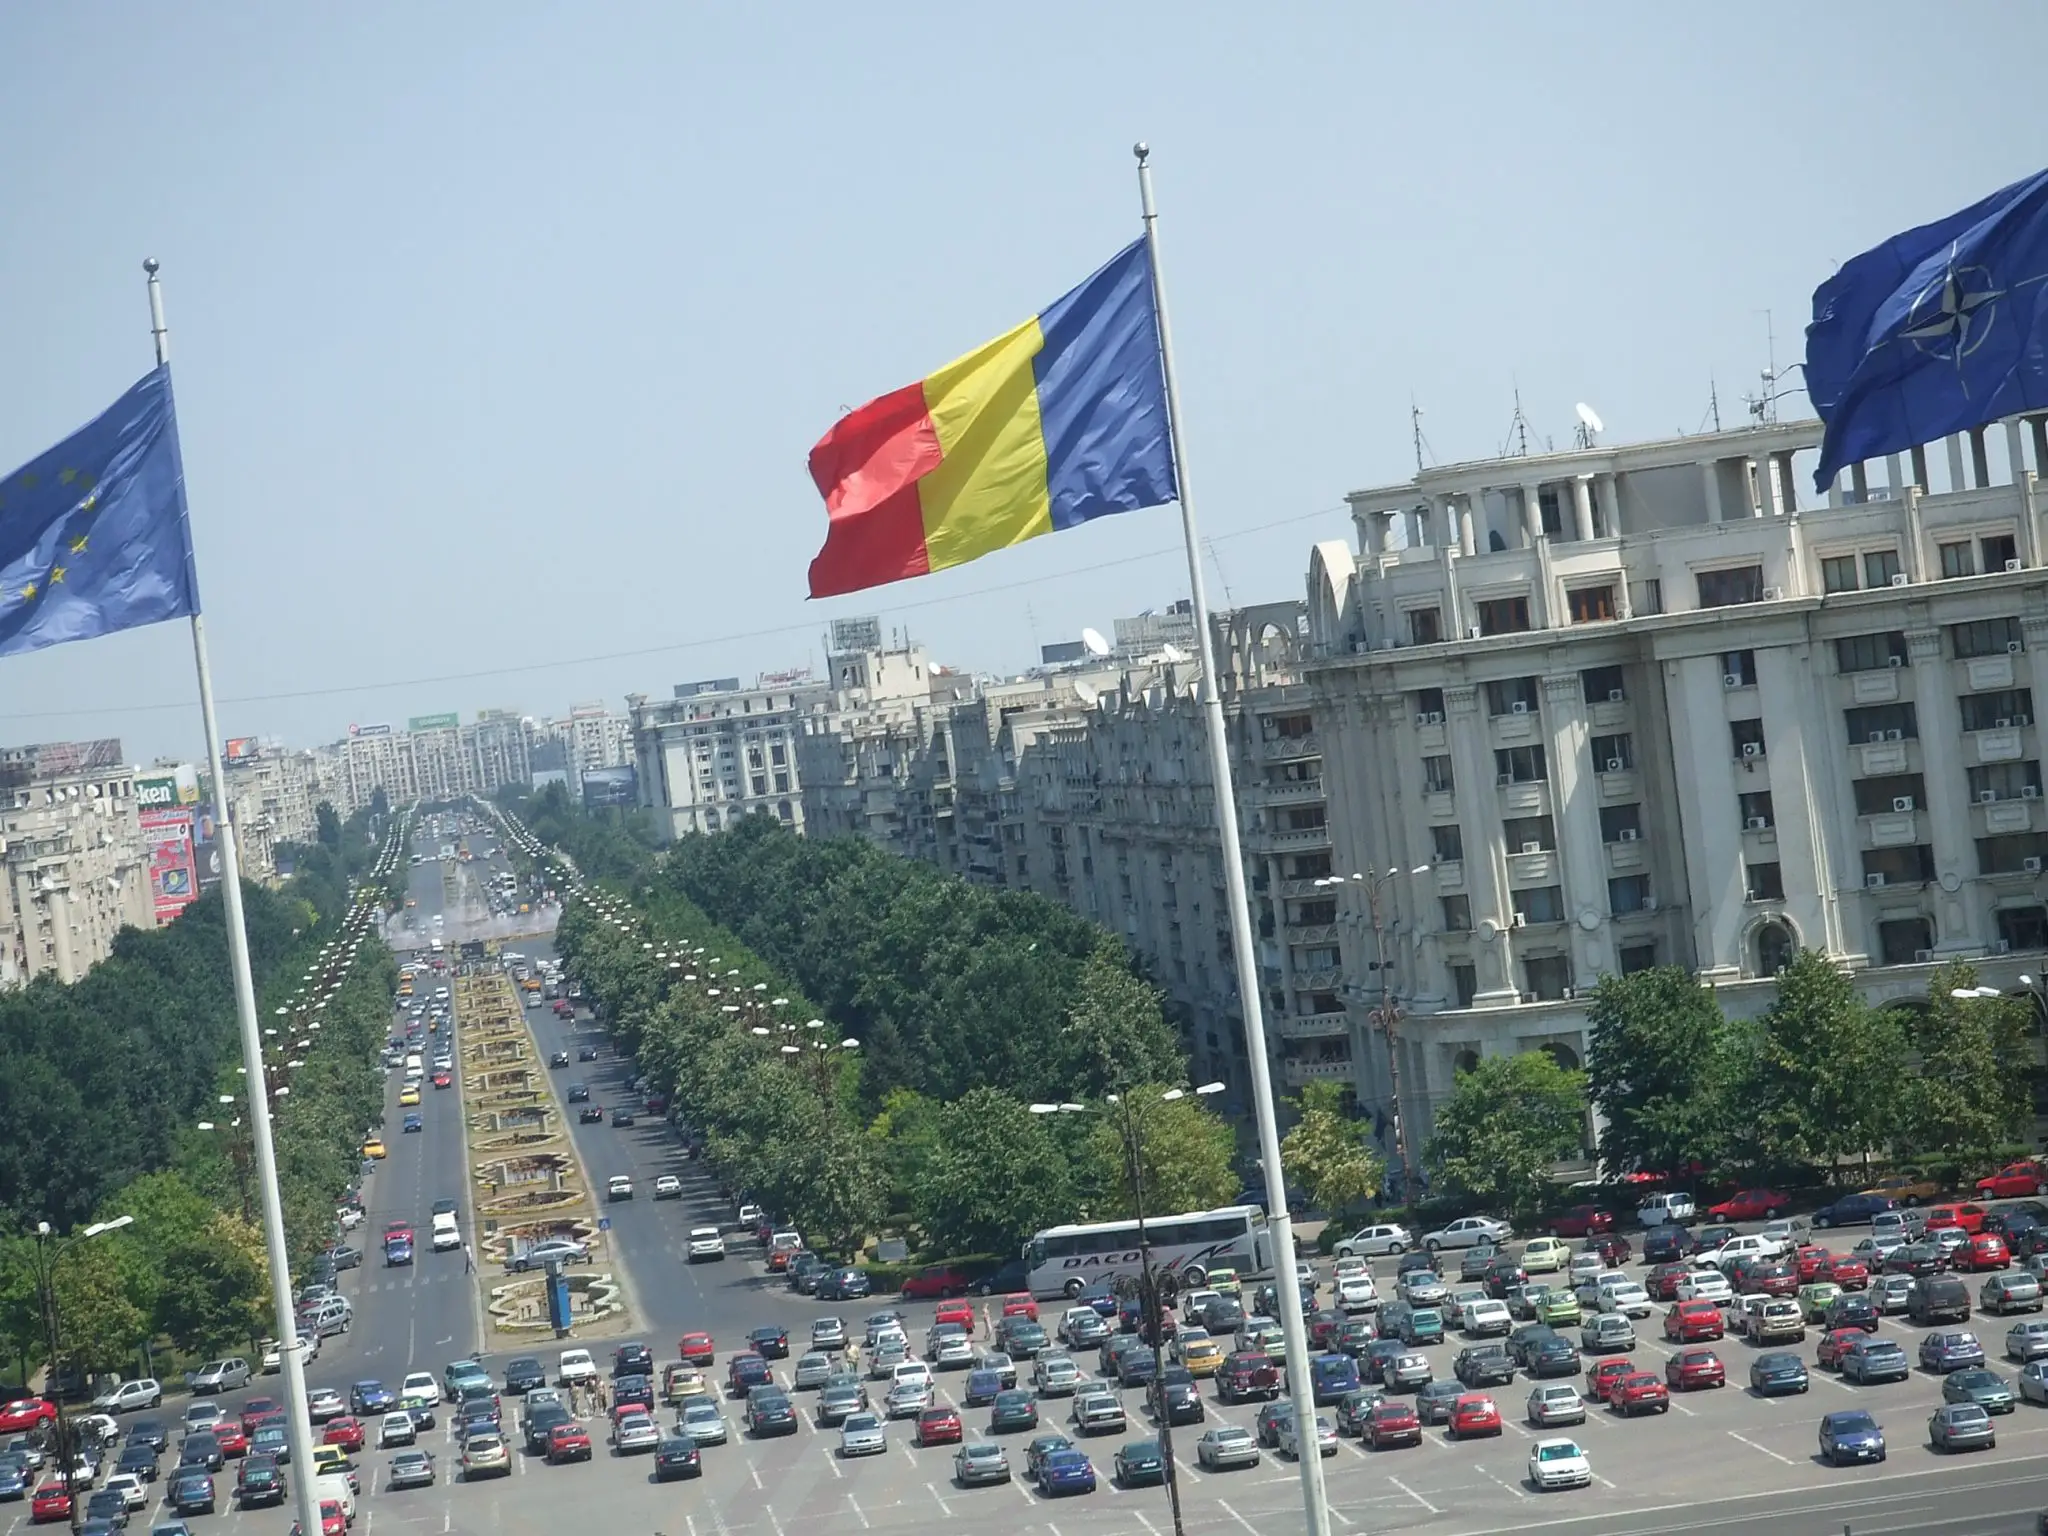 View from the Palace of Parliament, Bucharest